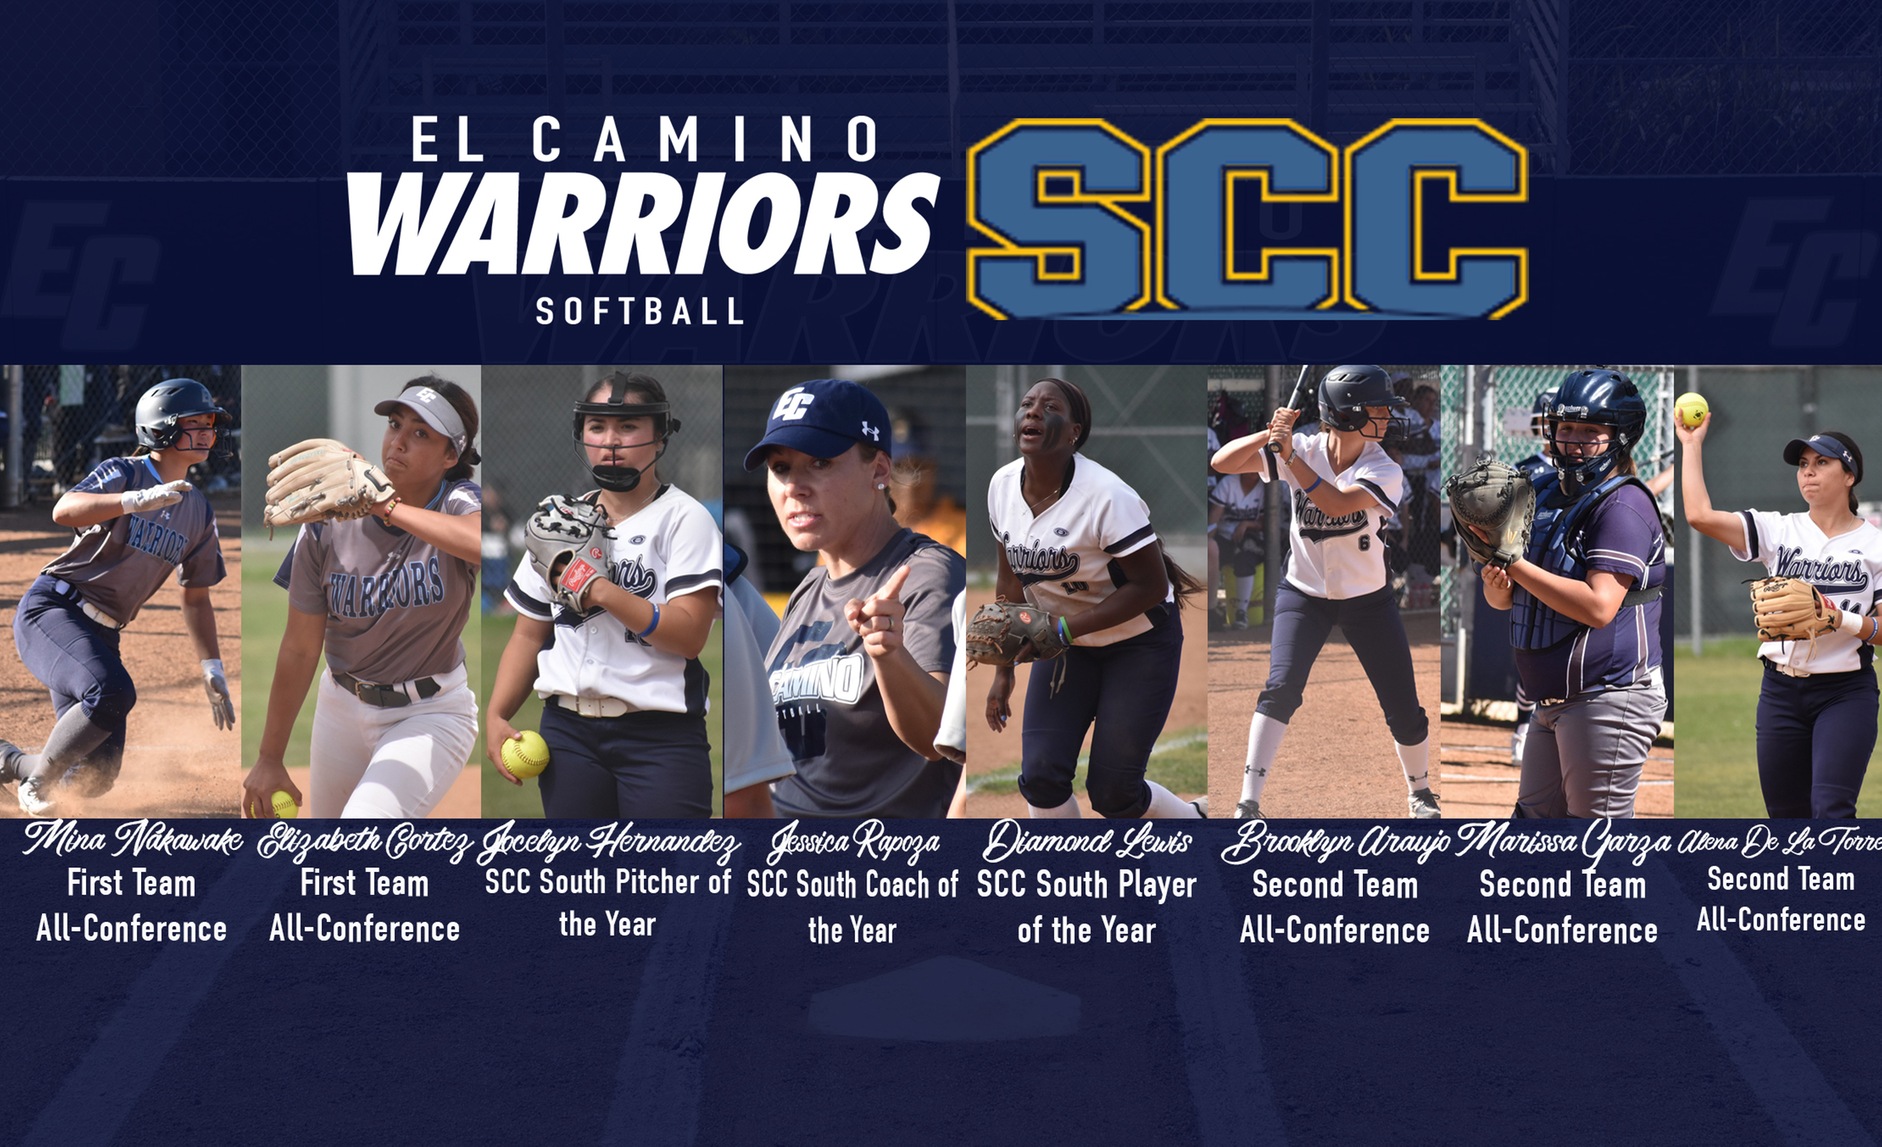 Warriors Sweep Top Awards as All-Conference Teams Announced